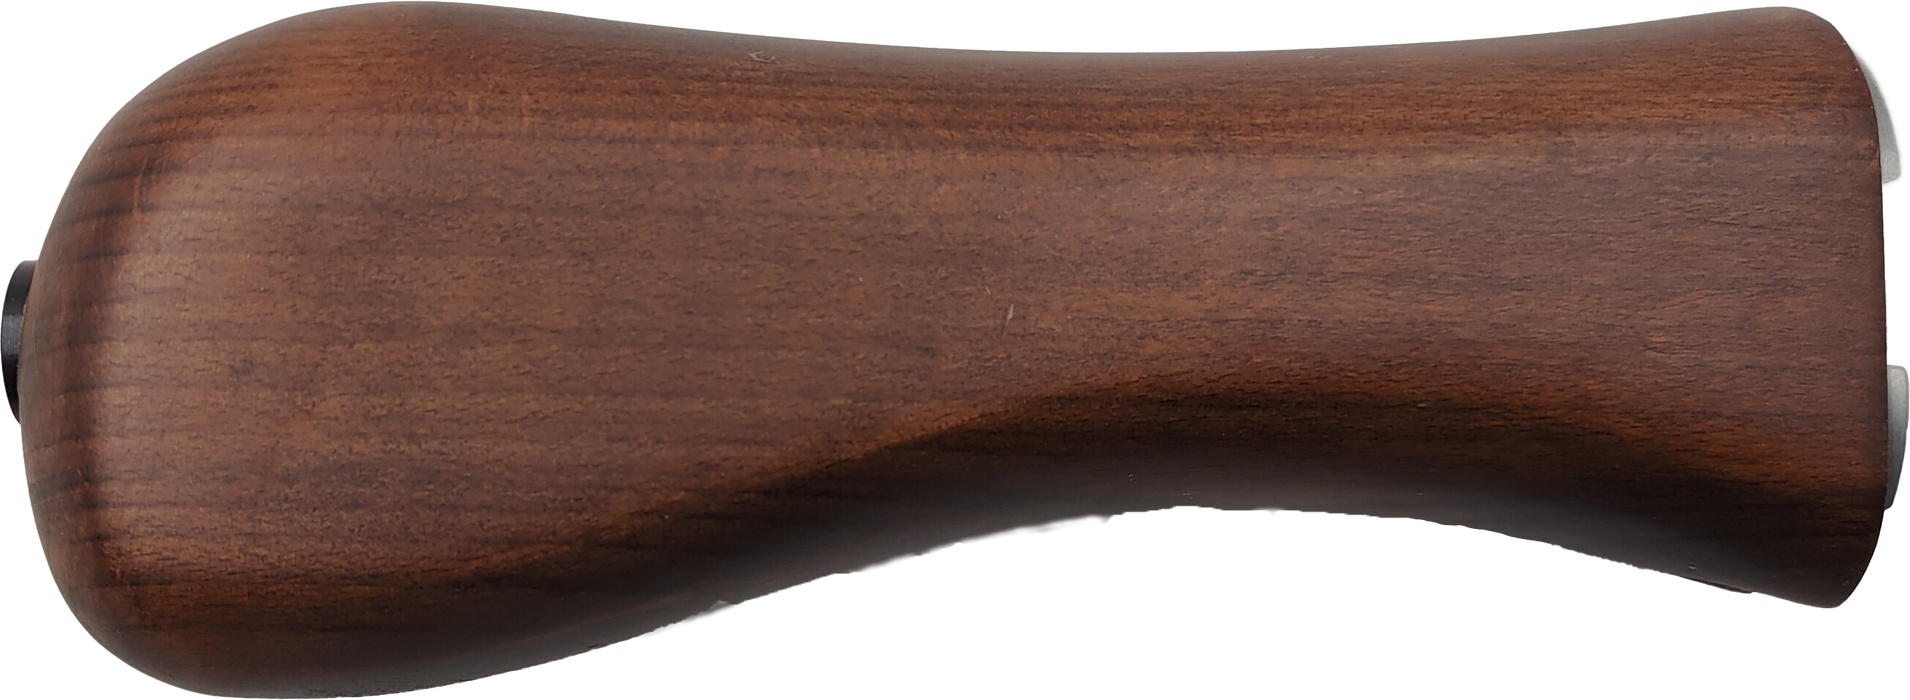 JAG ARMS Scattergun real wood Mares Leg Grip for the SO wood